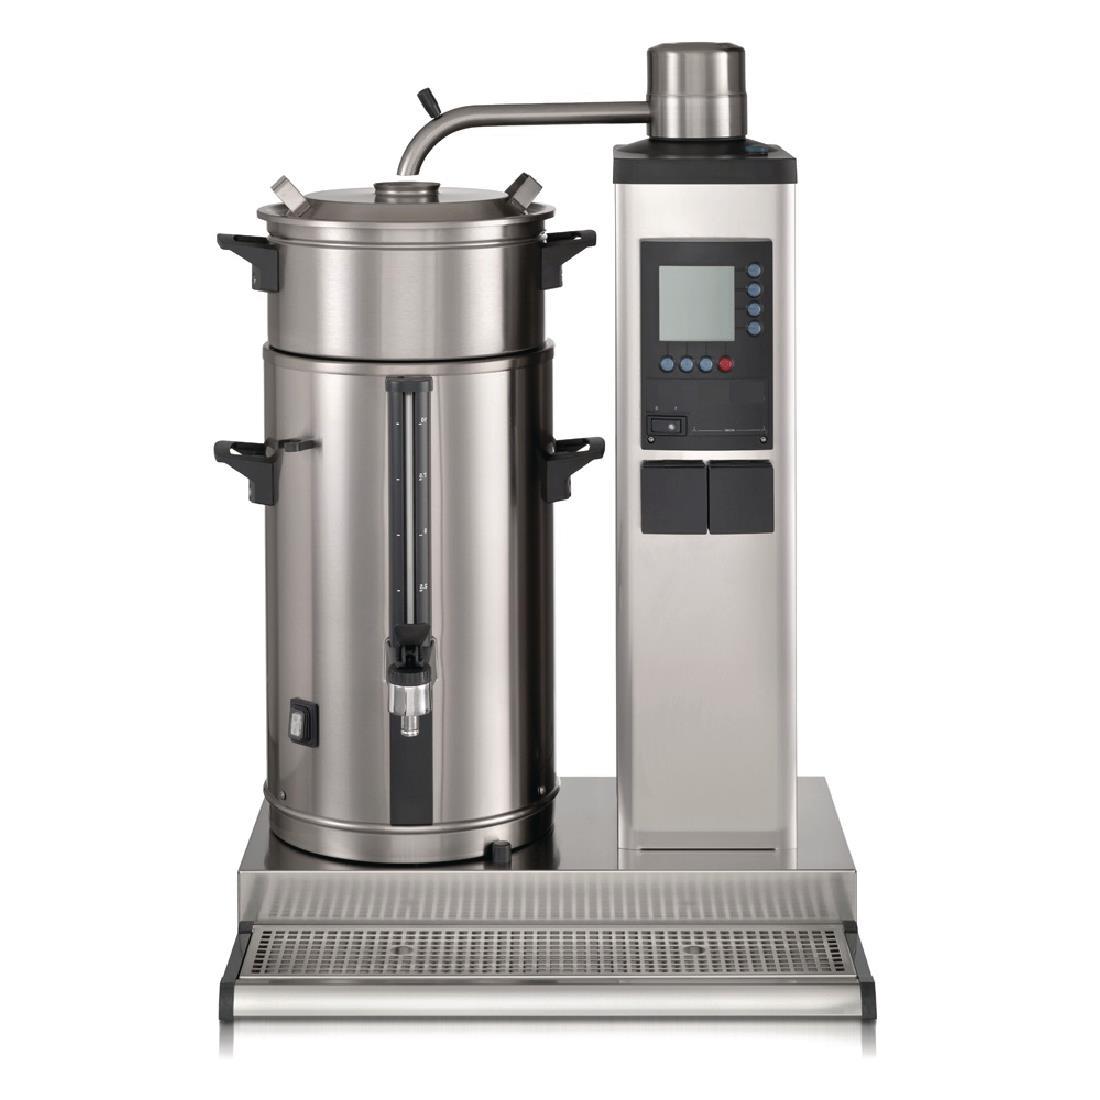 Bravilor B10 L Bulk Coffee Brewer with 10Ltr Coffee Urn Single Phase - DC676-1P  - 2